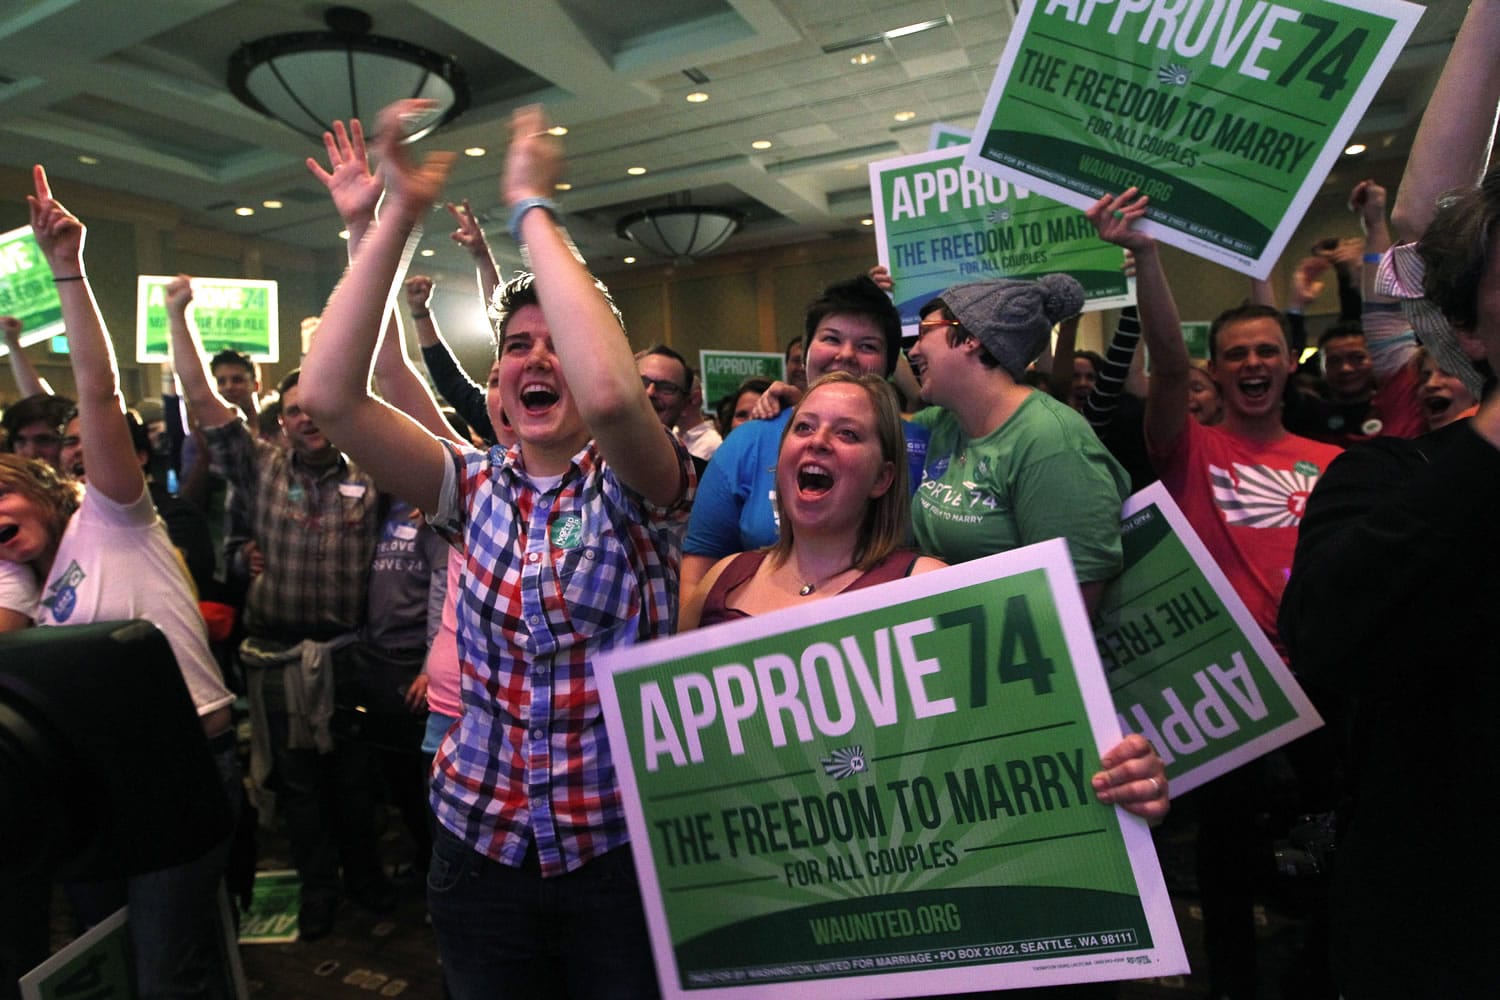 Supporters cheer at an election watch party for proponents of Referendum 74, which would uphold the state's new same-sex marriage law, Tuesday in Seattle.